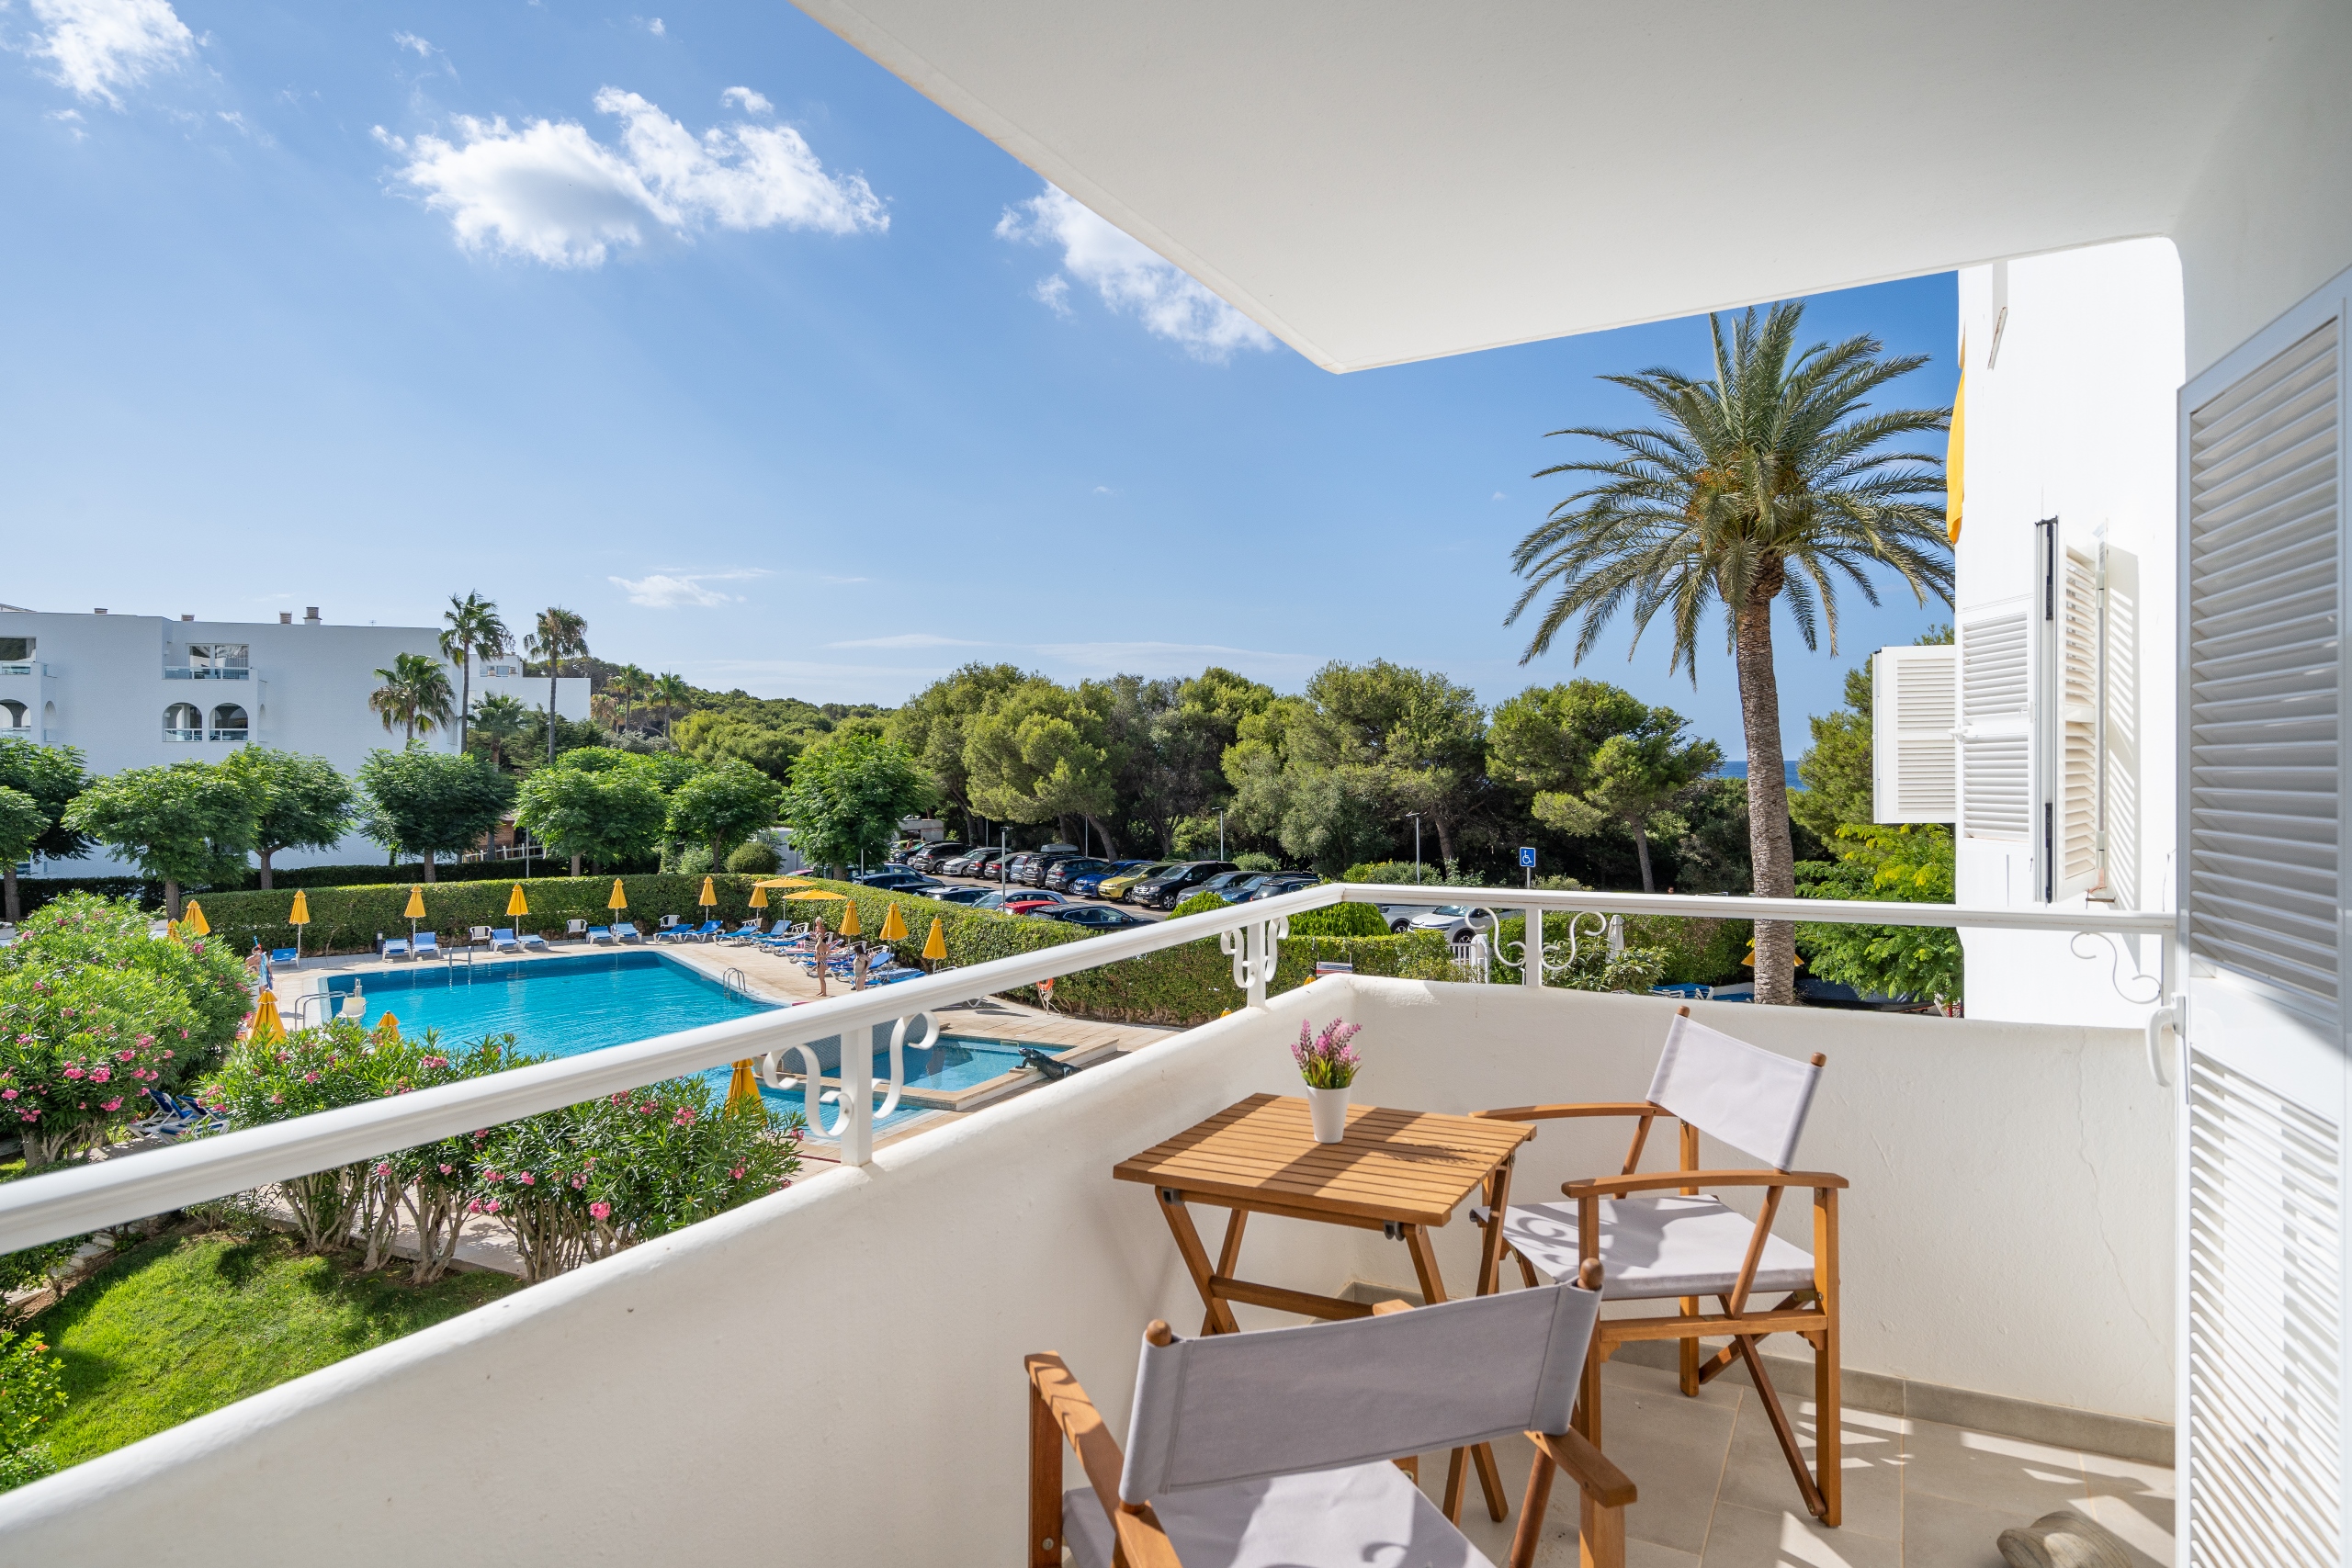 Terrace overlooking the pool of spectacular renovated apartment on the seafront